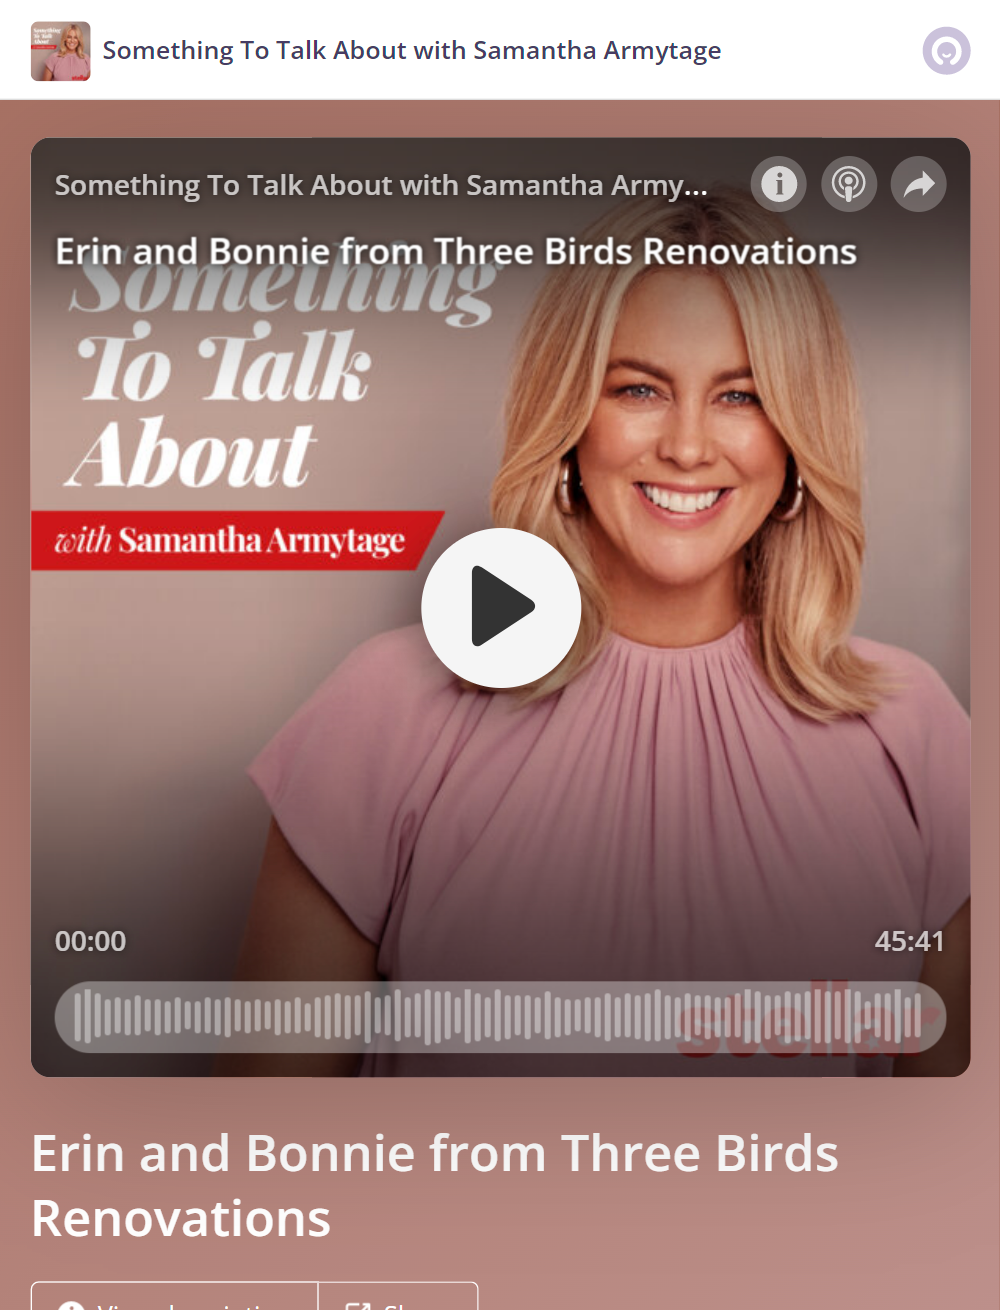 omny.fm_shows_something-to-talk-about-with-samantha-armytage_erin-and-bonnie-from-three-birds-renovations.jpg